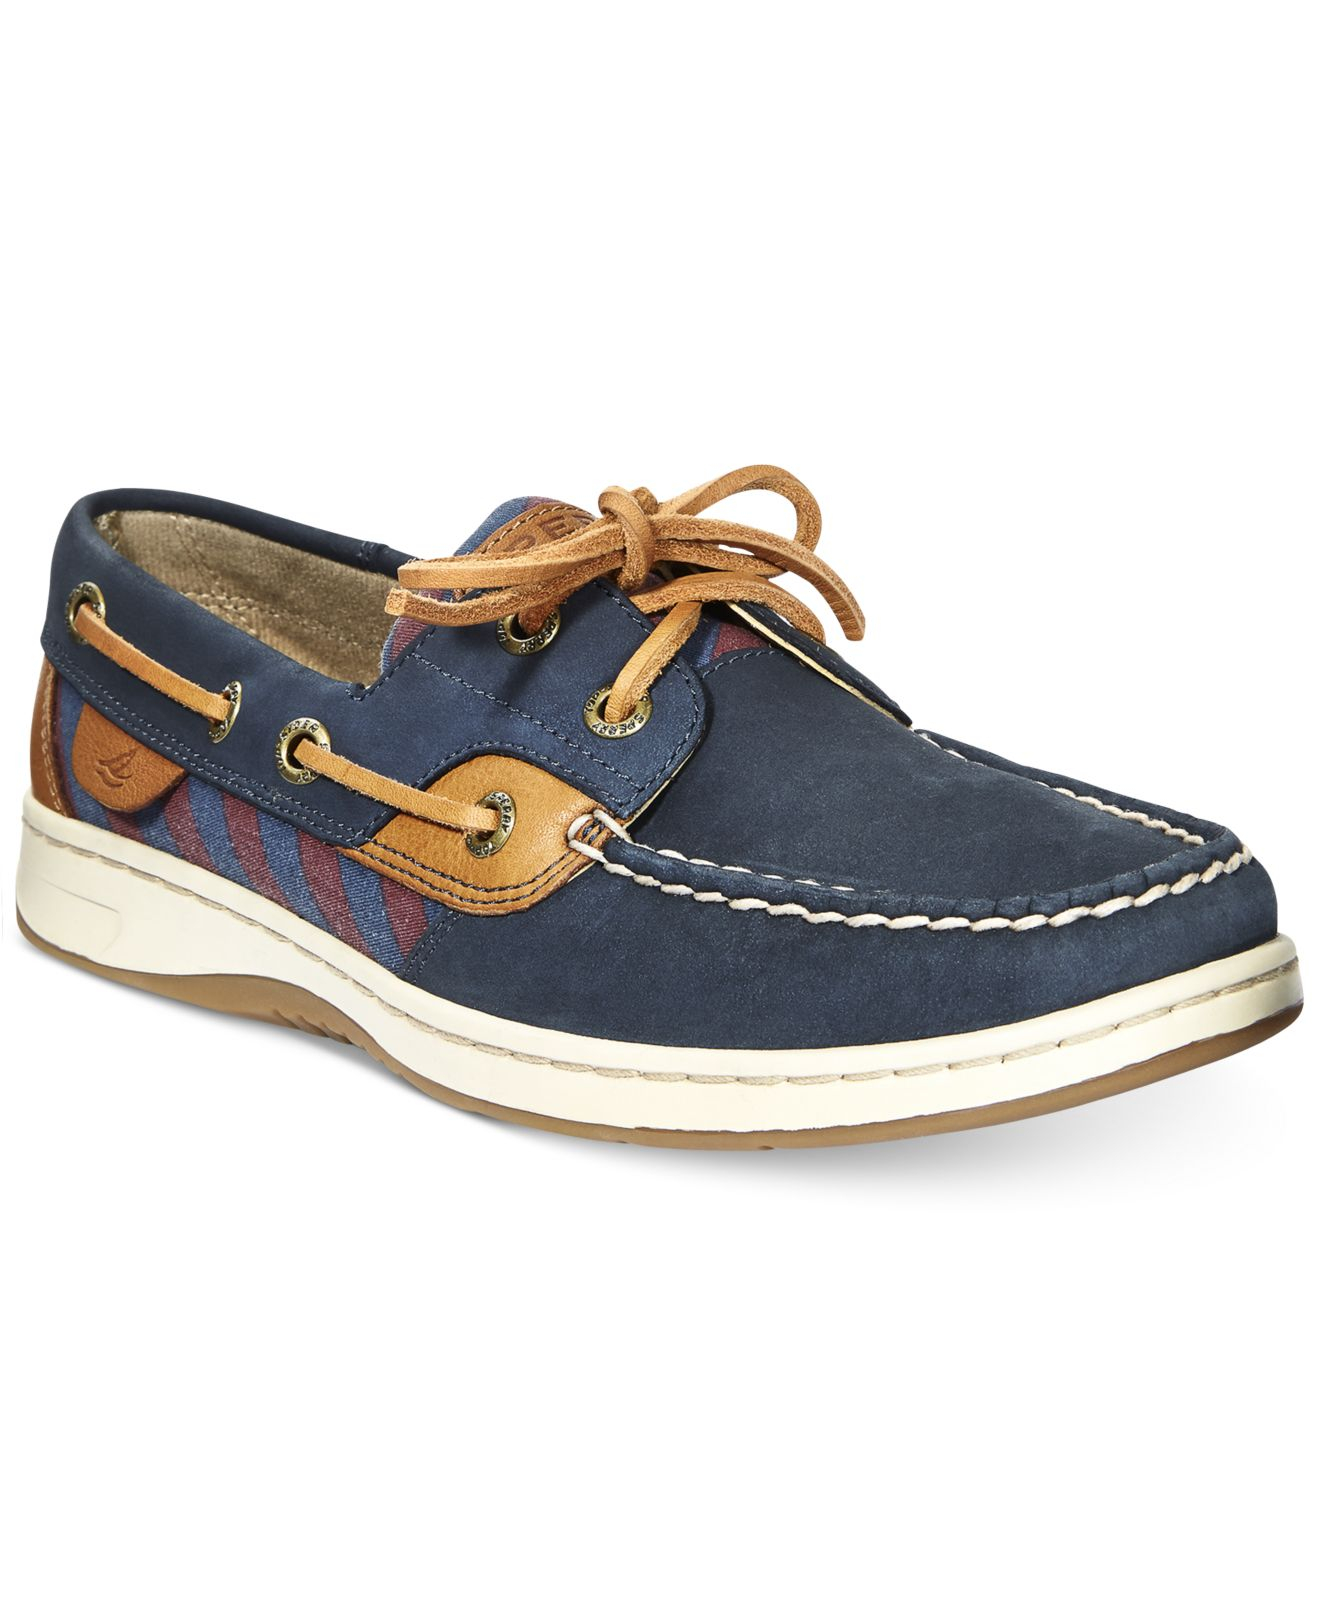 Lyst - Sperry Top-Sider Women's Bluefish Tie Stripe Boat Shoes in Blue